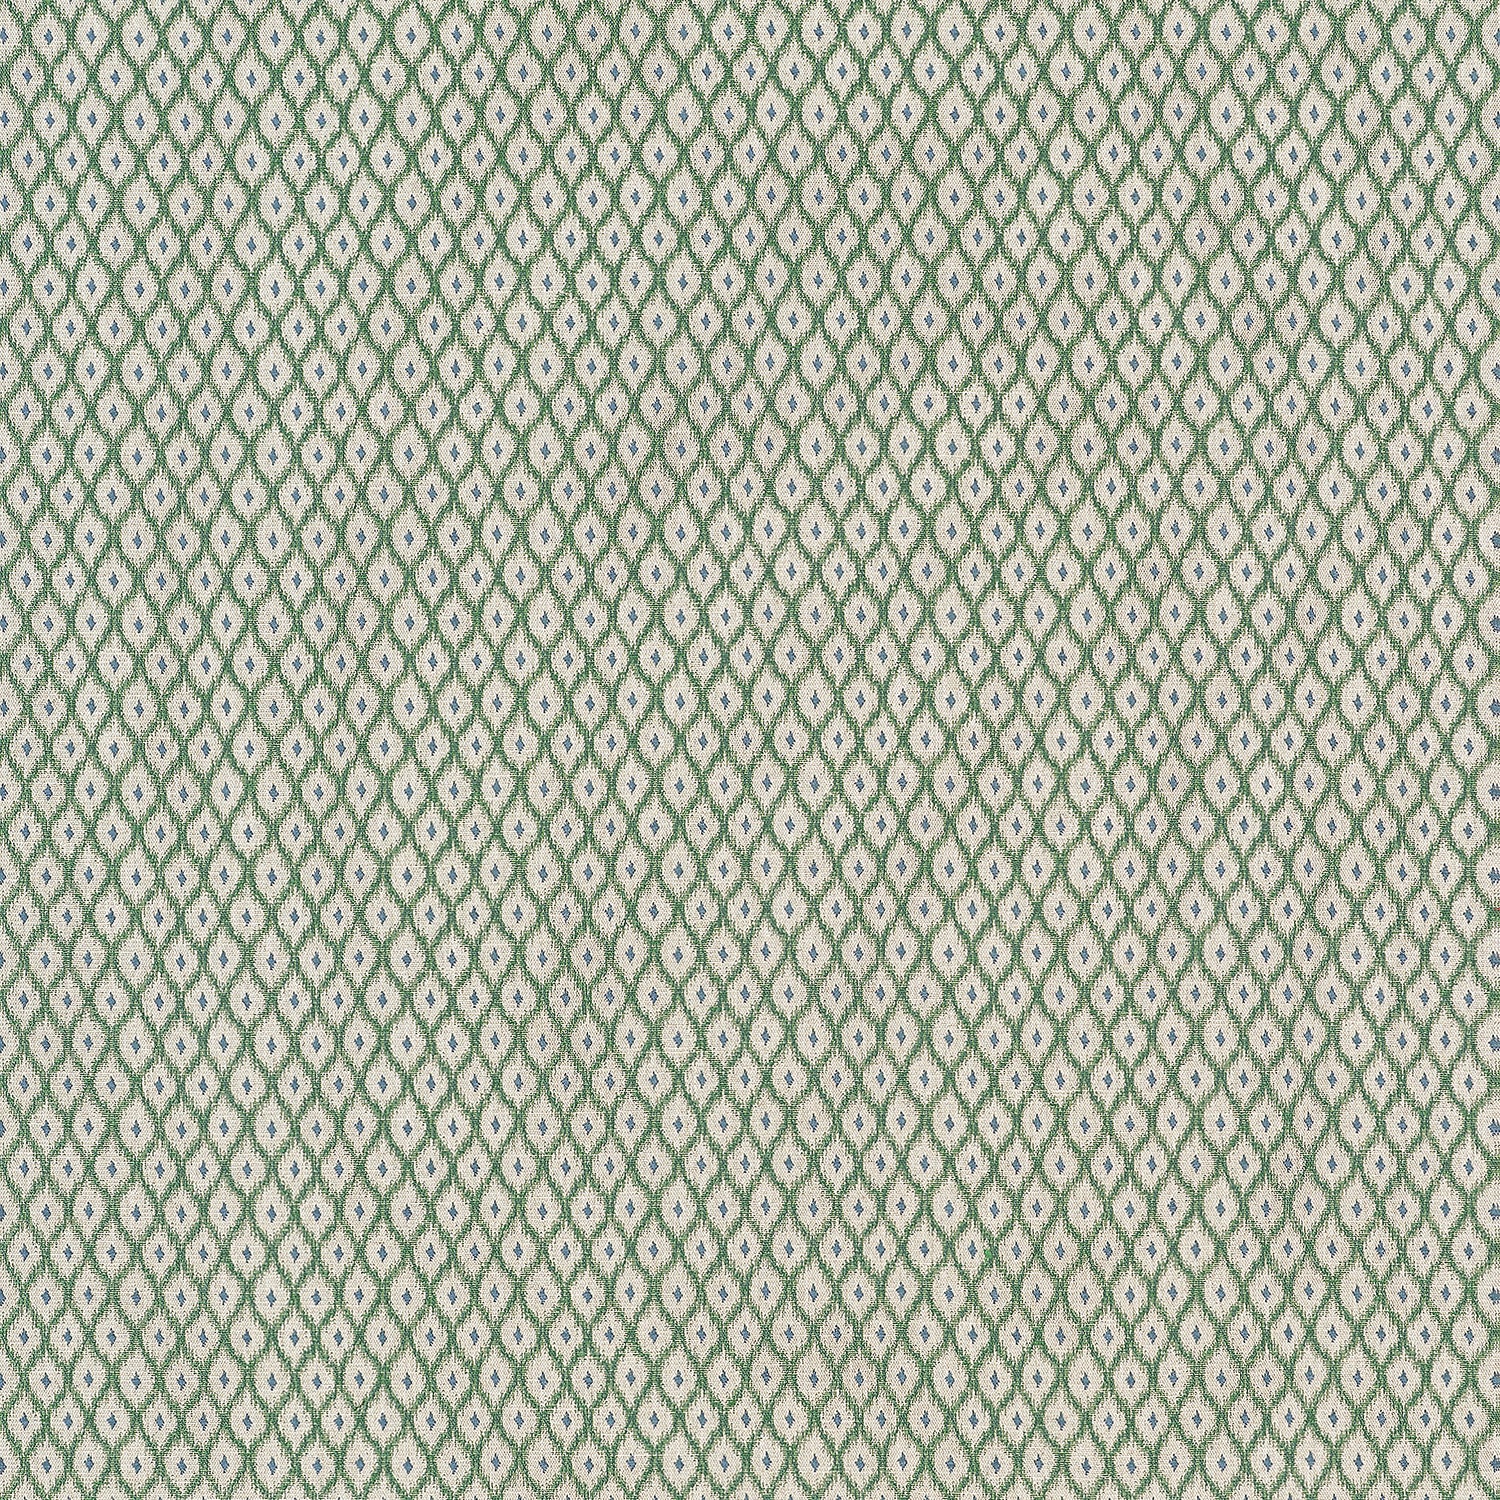 Josephine fabric in emerald color - pattern number W81905 - by Thibaut in the Companions collection